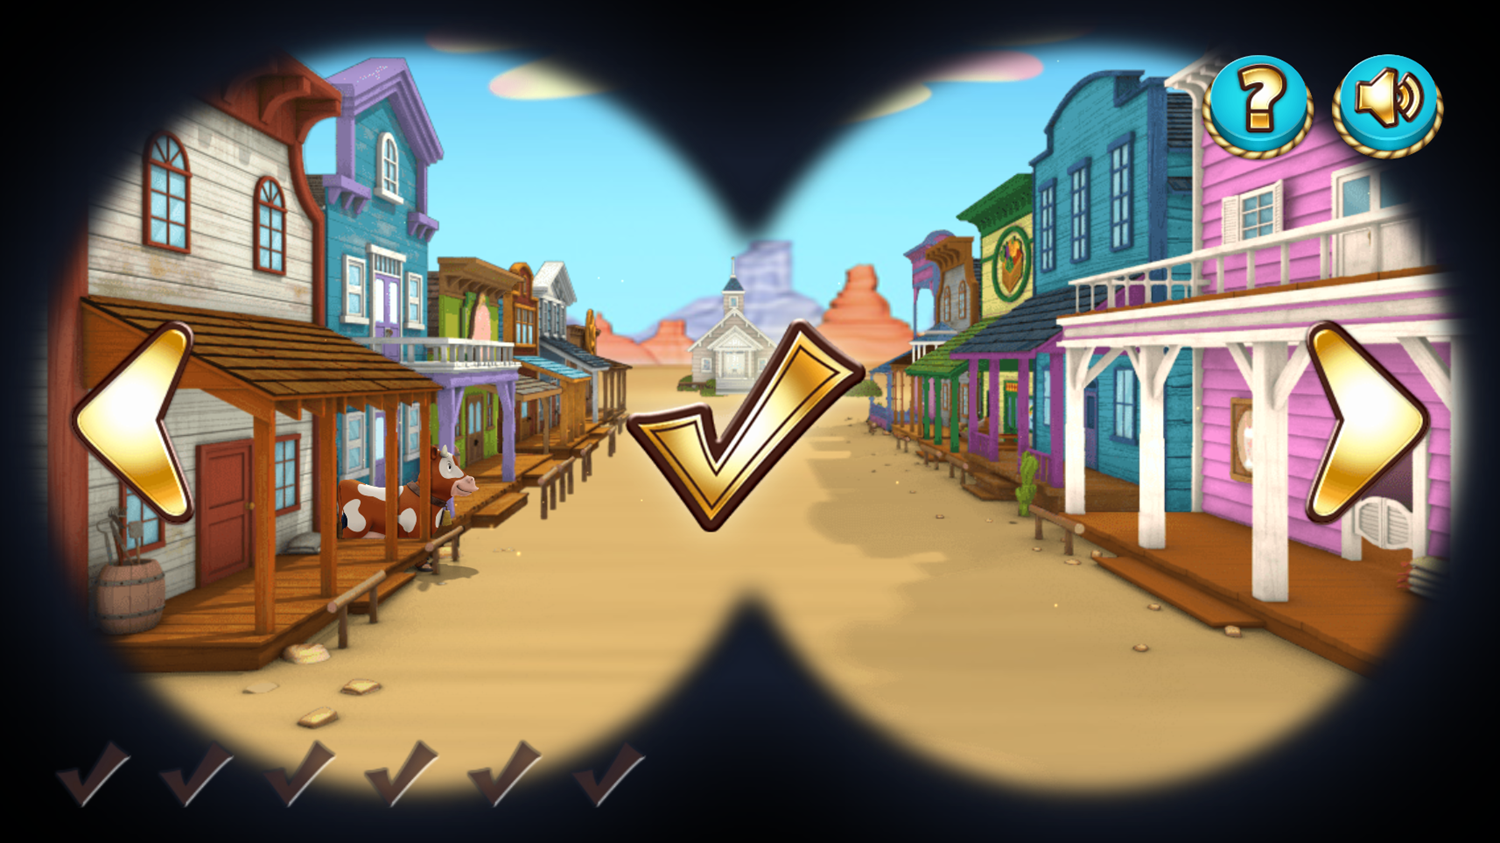 Sheriff Callie's Wild West Deputy for a Day Game Cattle Chaos Play Screenshot.